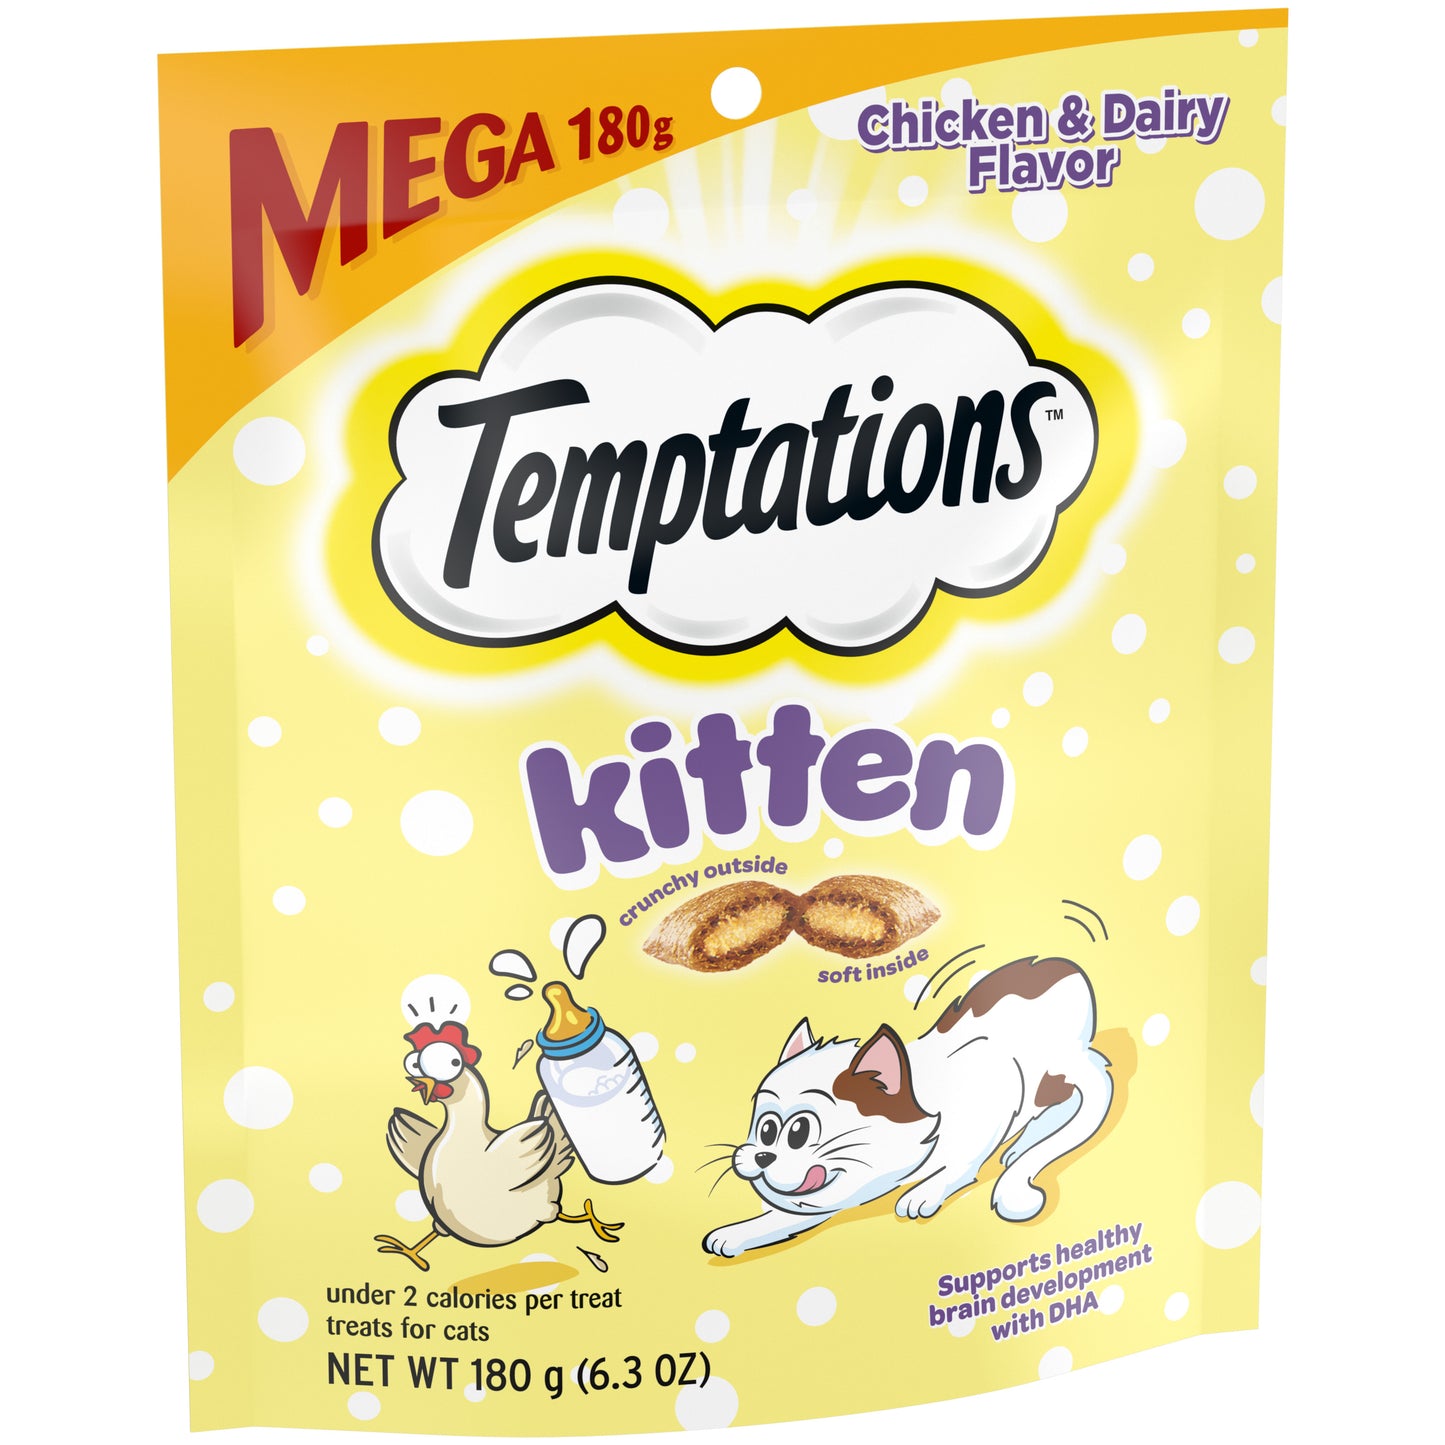 [Temptations][BUNDLE TEMPTATIONS Crunchy and Soft Kitten Treats, Chicken and Dairy Flavor, 6.3 oz. Pouch][Image Center Left (3/4 Angle)]